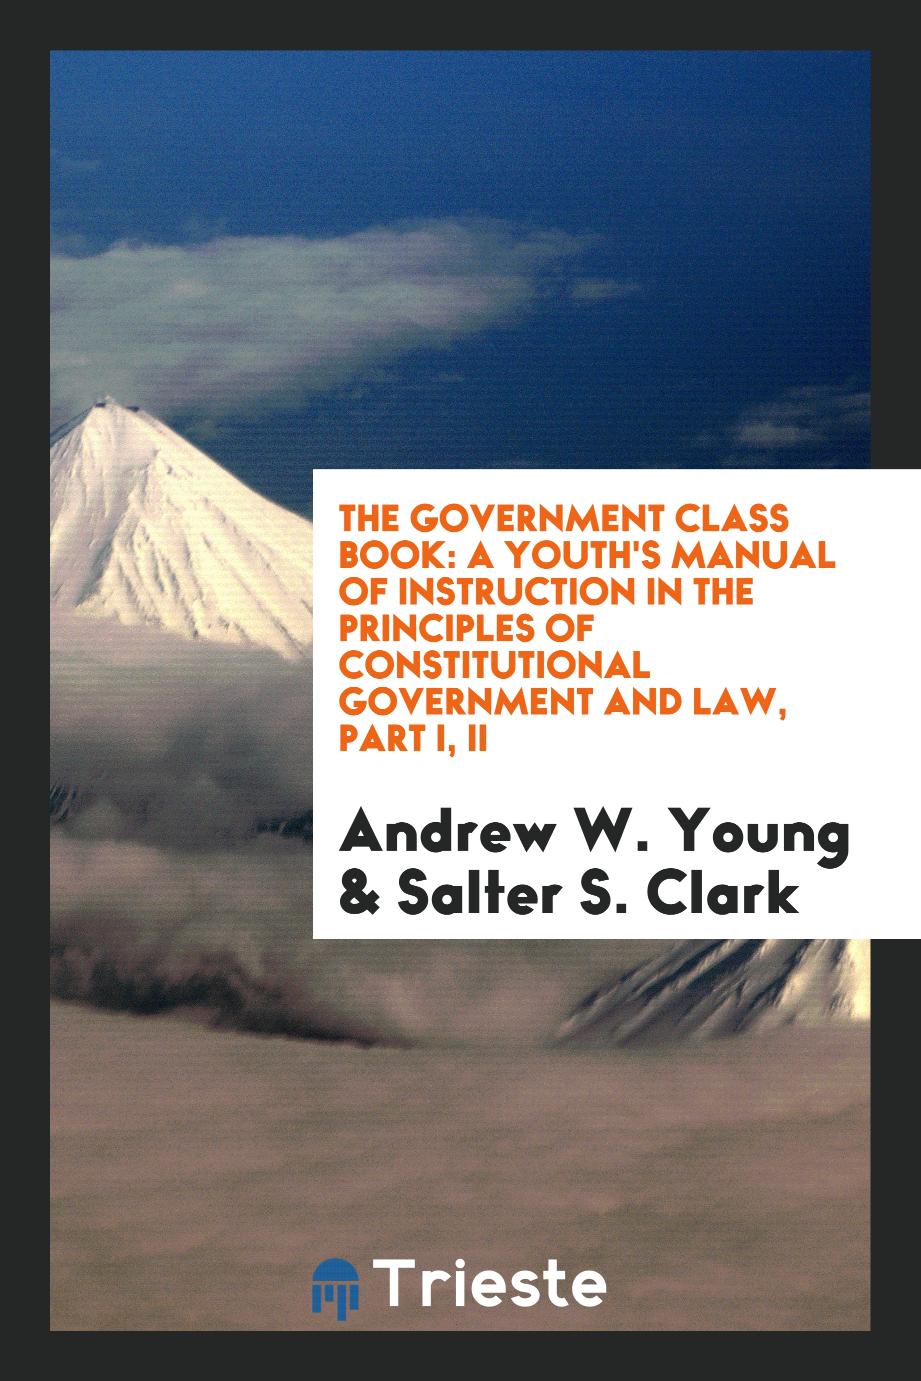 The government class book: a youth's manual of instruction in the principles of constitutional government and law, Part I, II